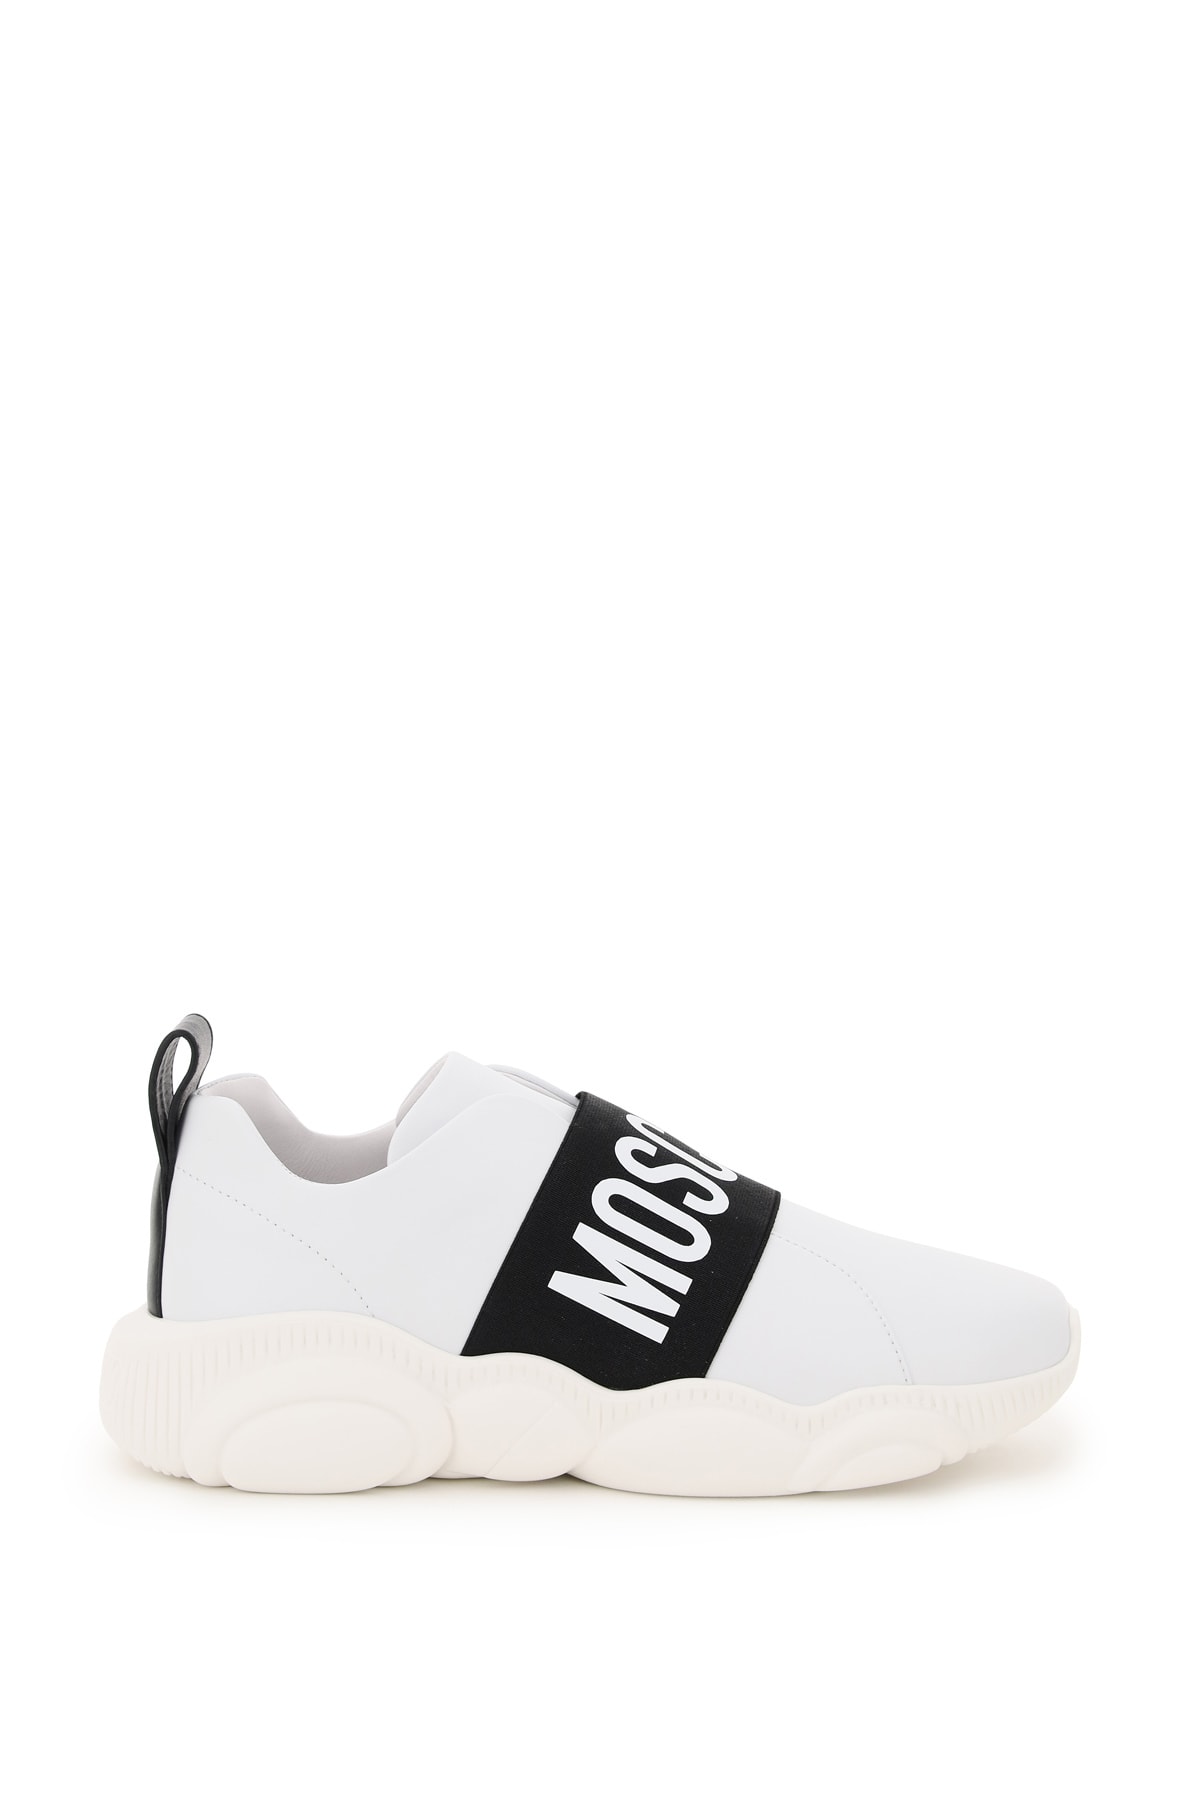 Moschino Slip On Teddy Sneakers